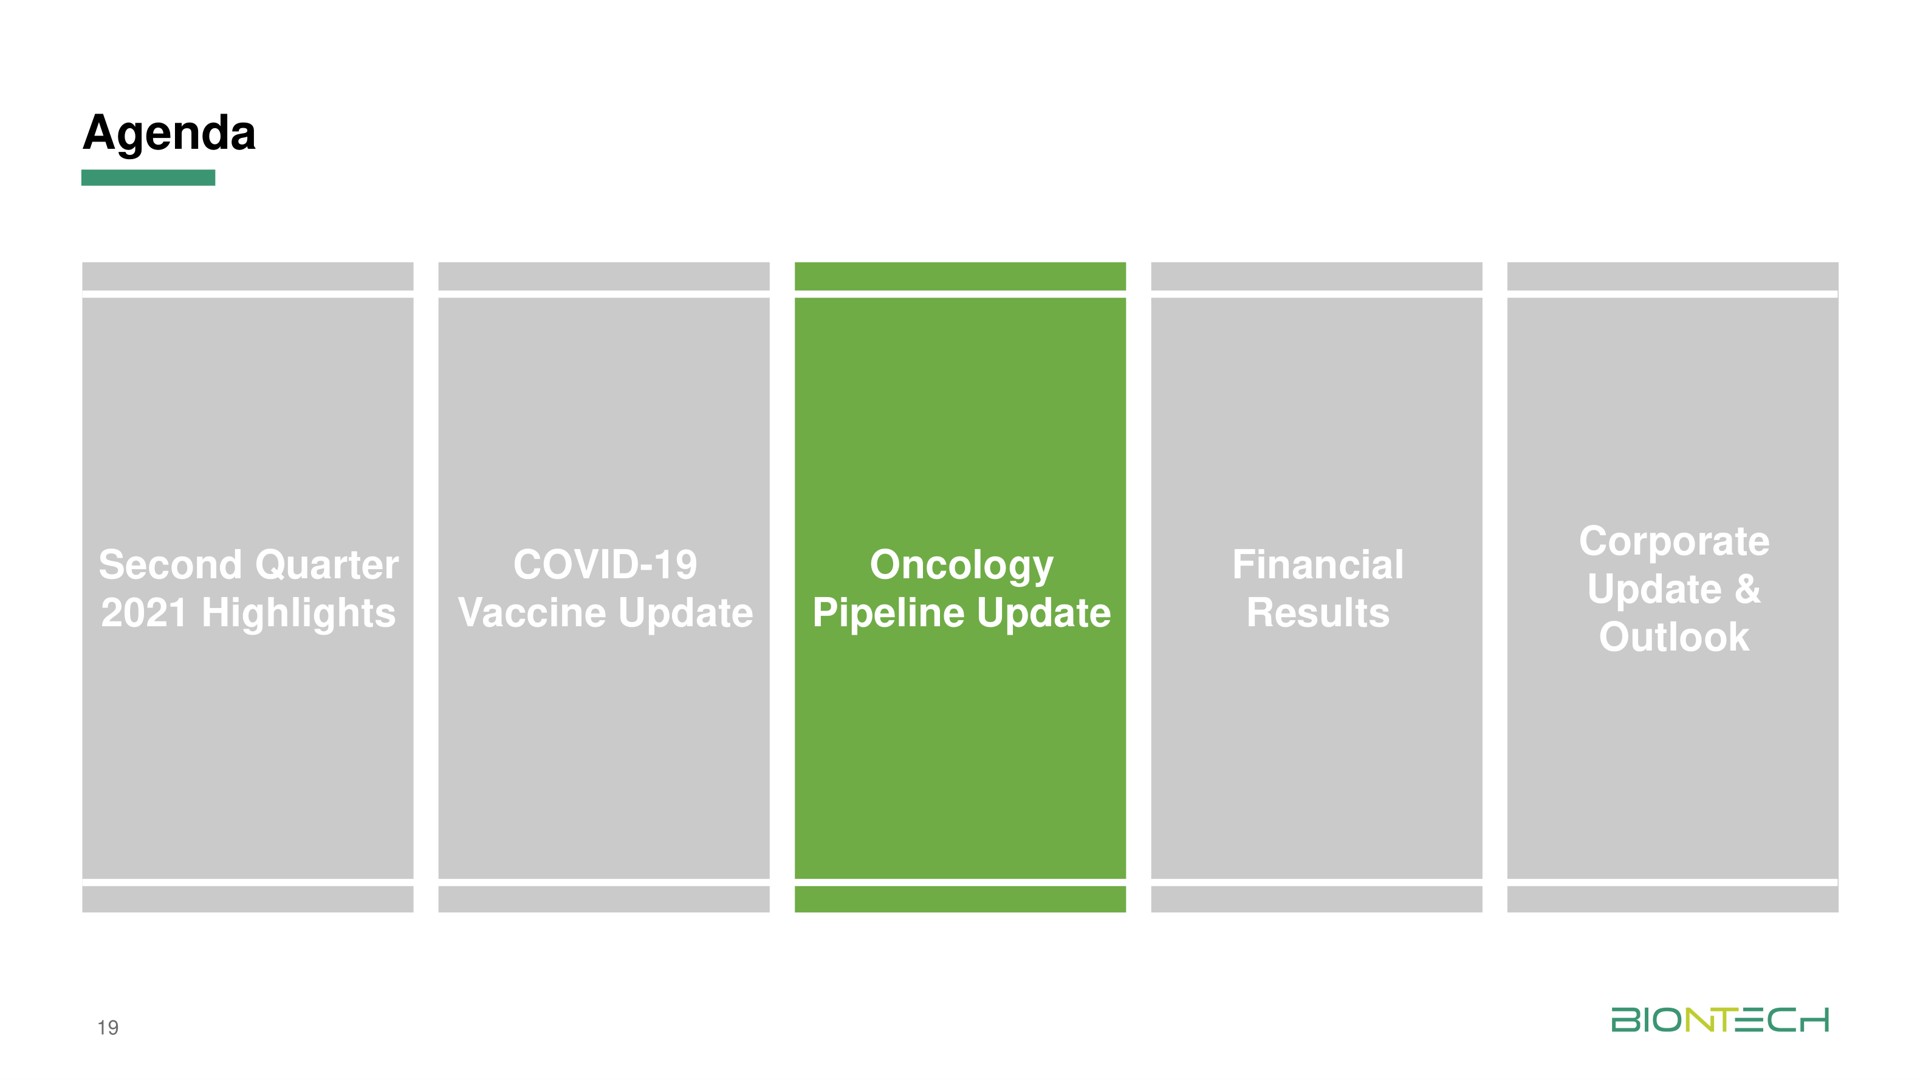 agenda second quarter highlights covid vaccine update oncology pipeline update financial results corporate update outlook | BioNTech